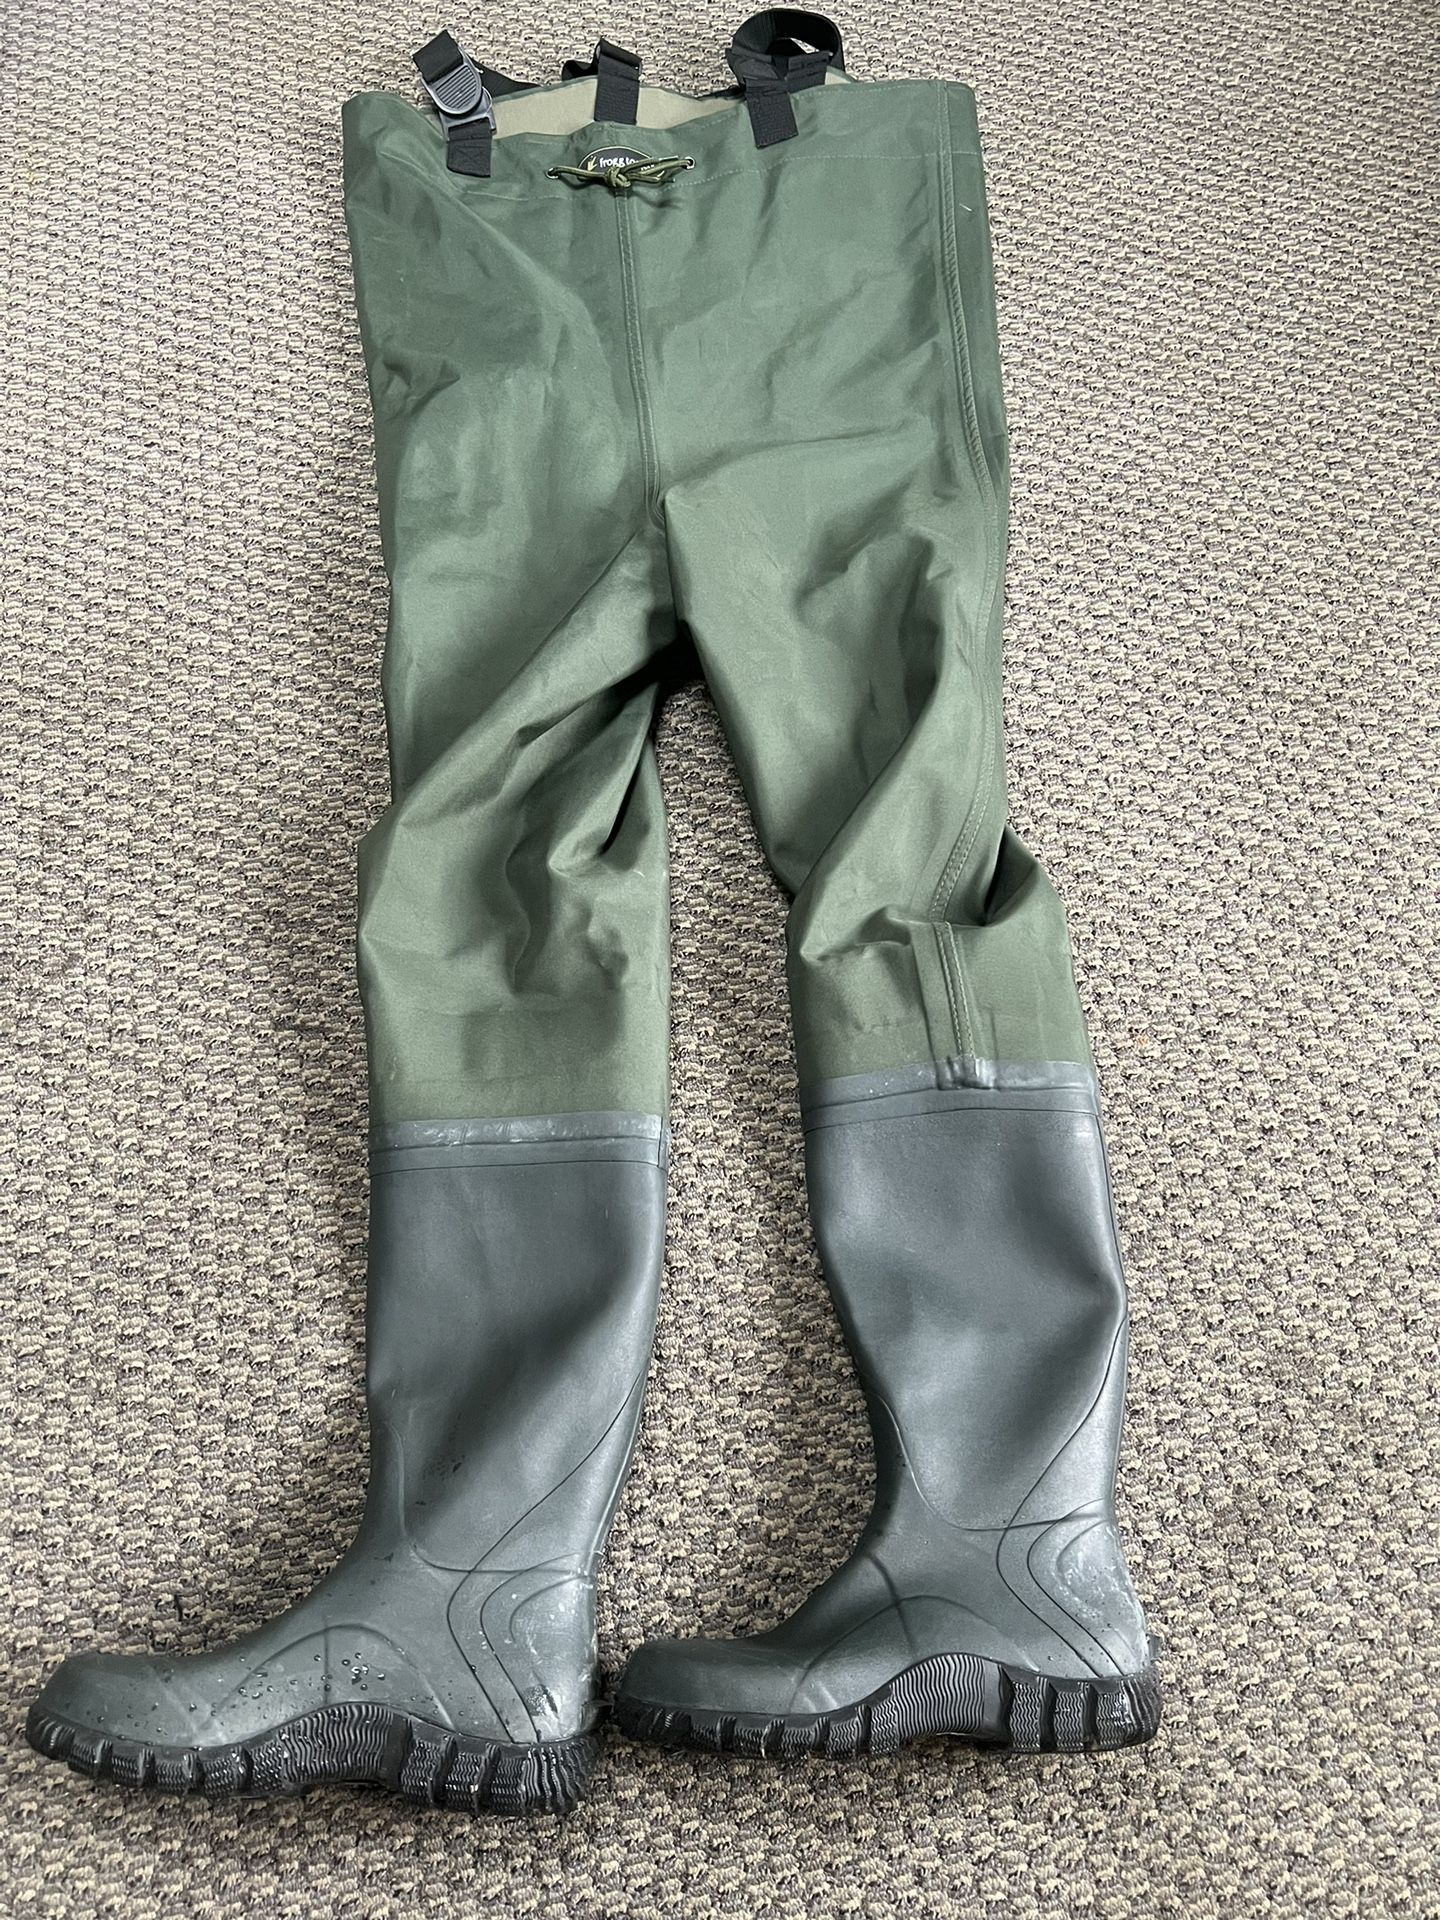 Frogg Toggs Fishing Waders size 9